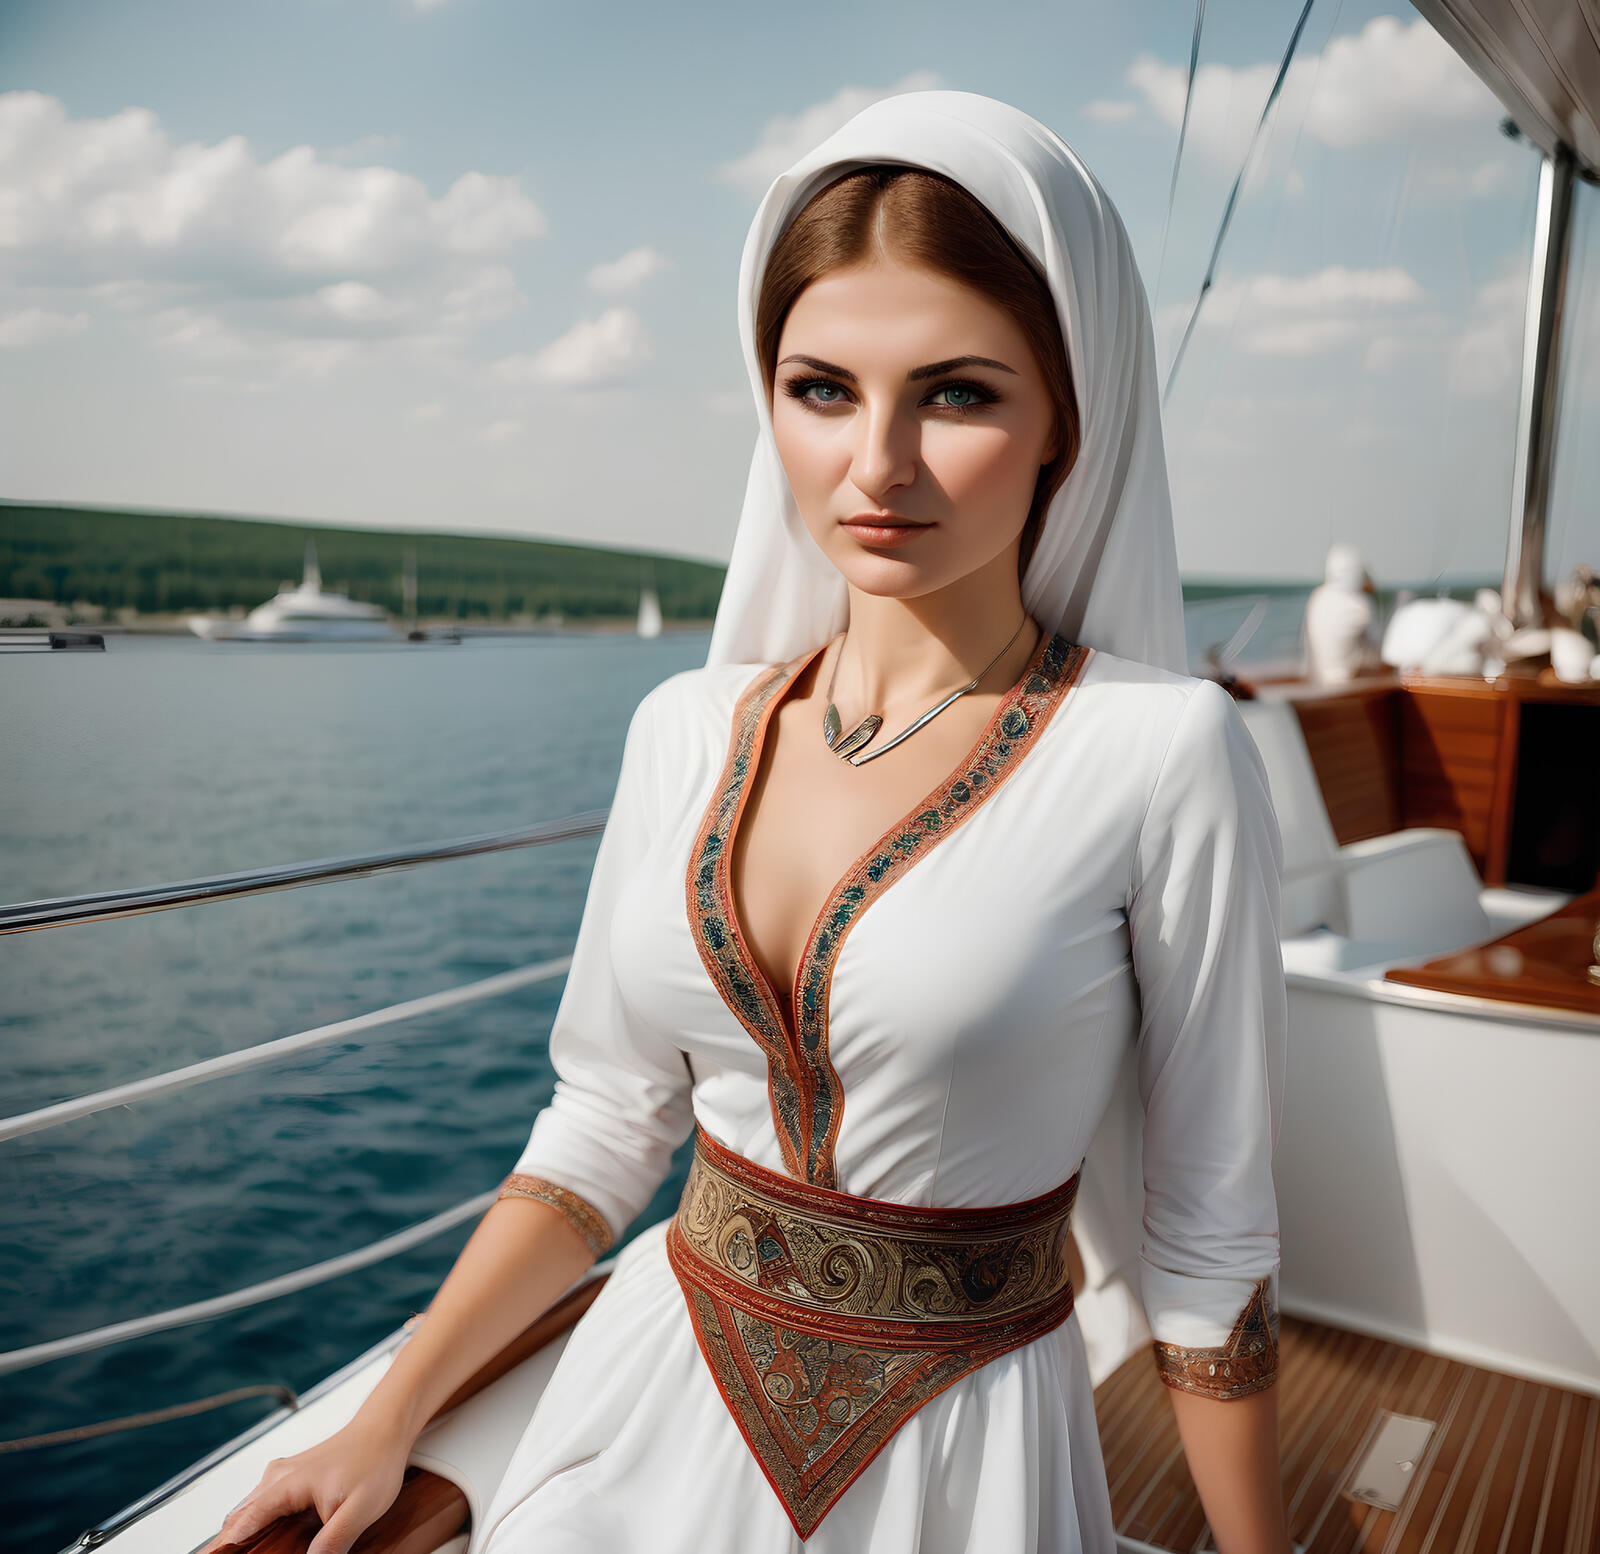 Free photo A girl on a yacht